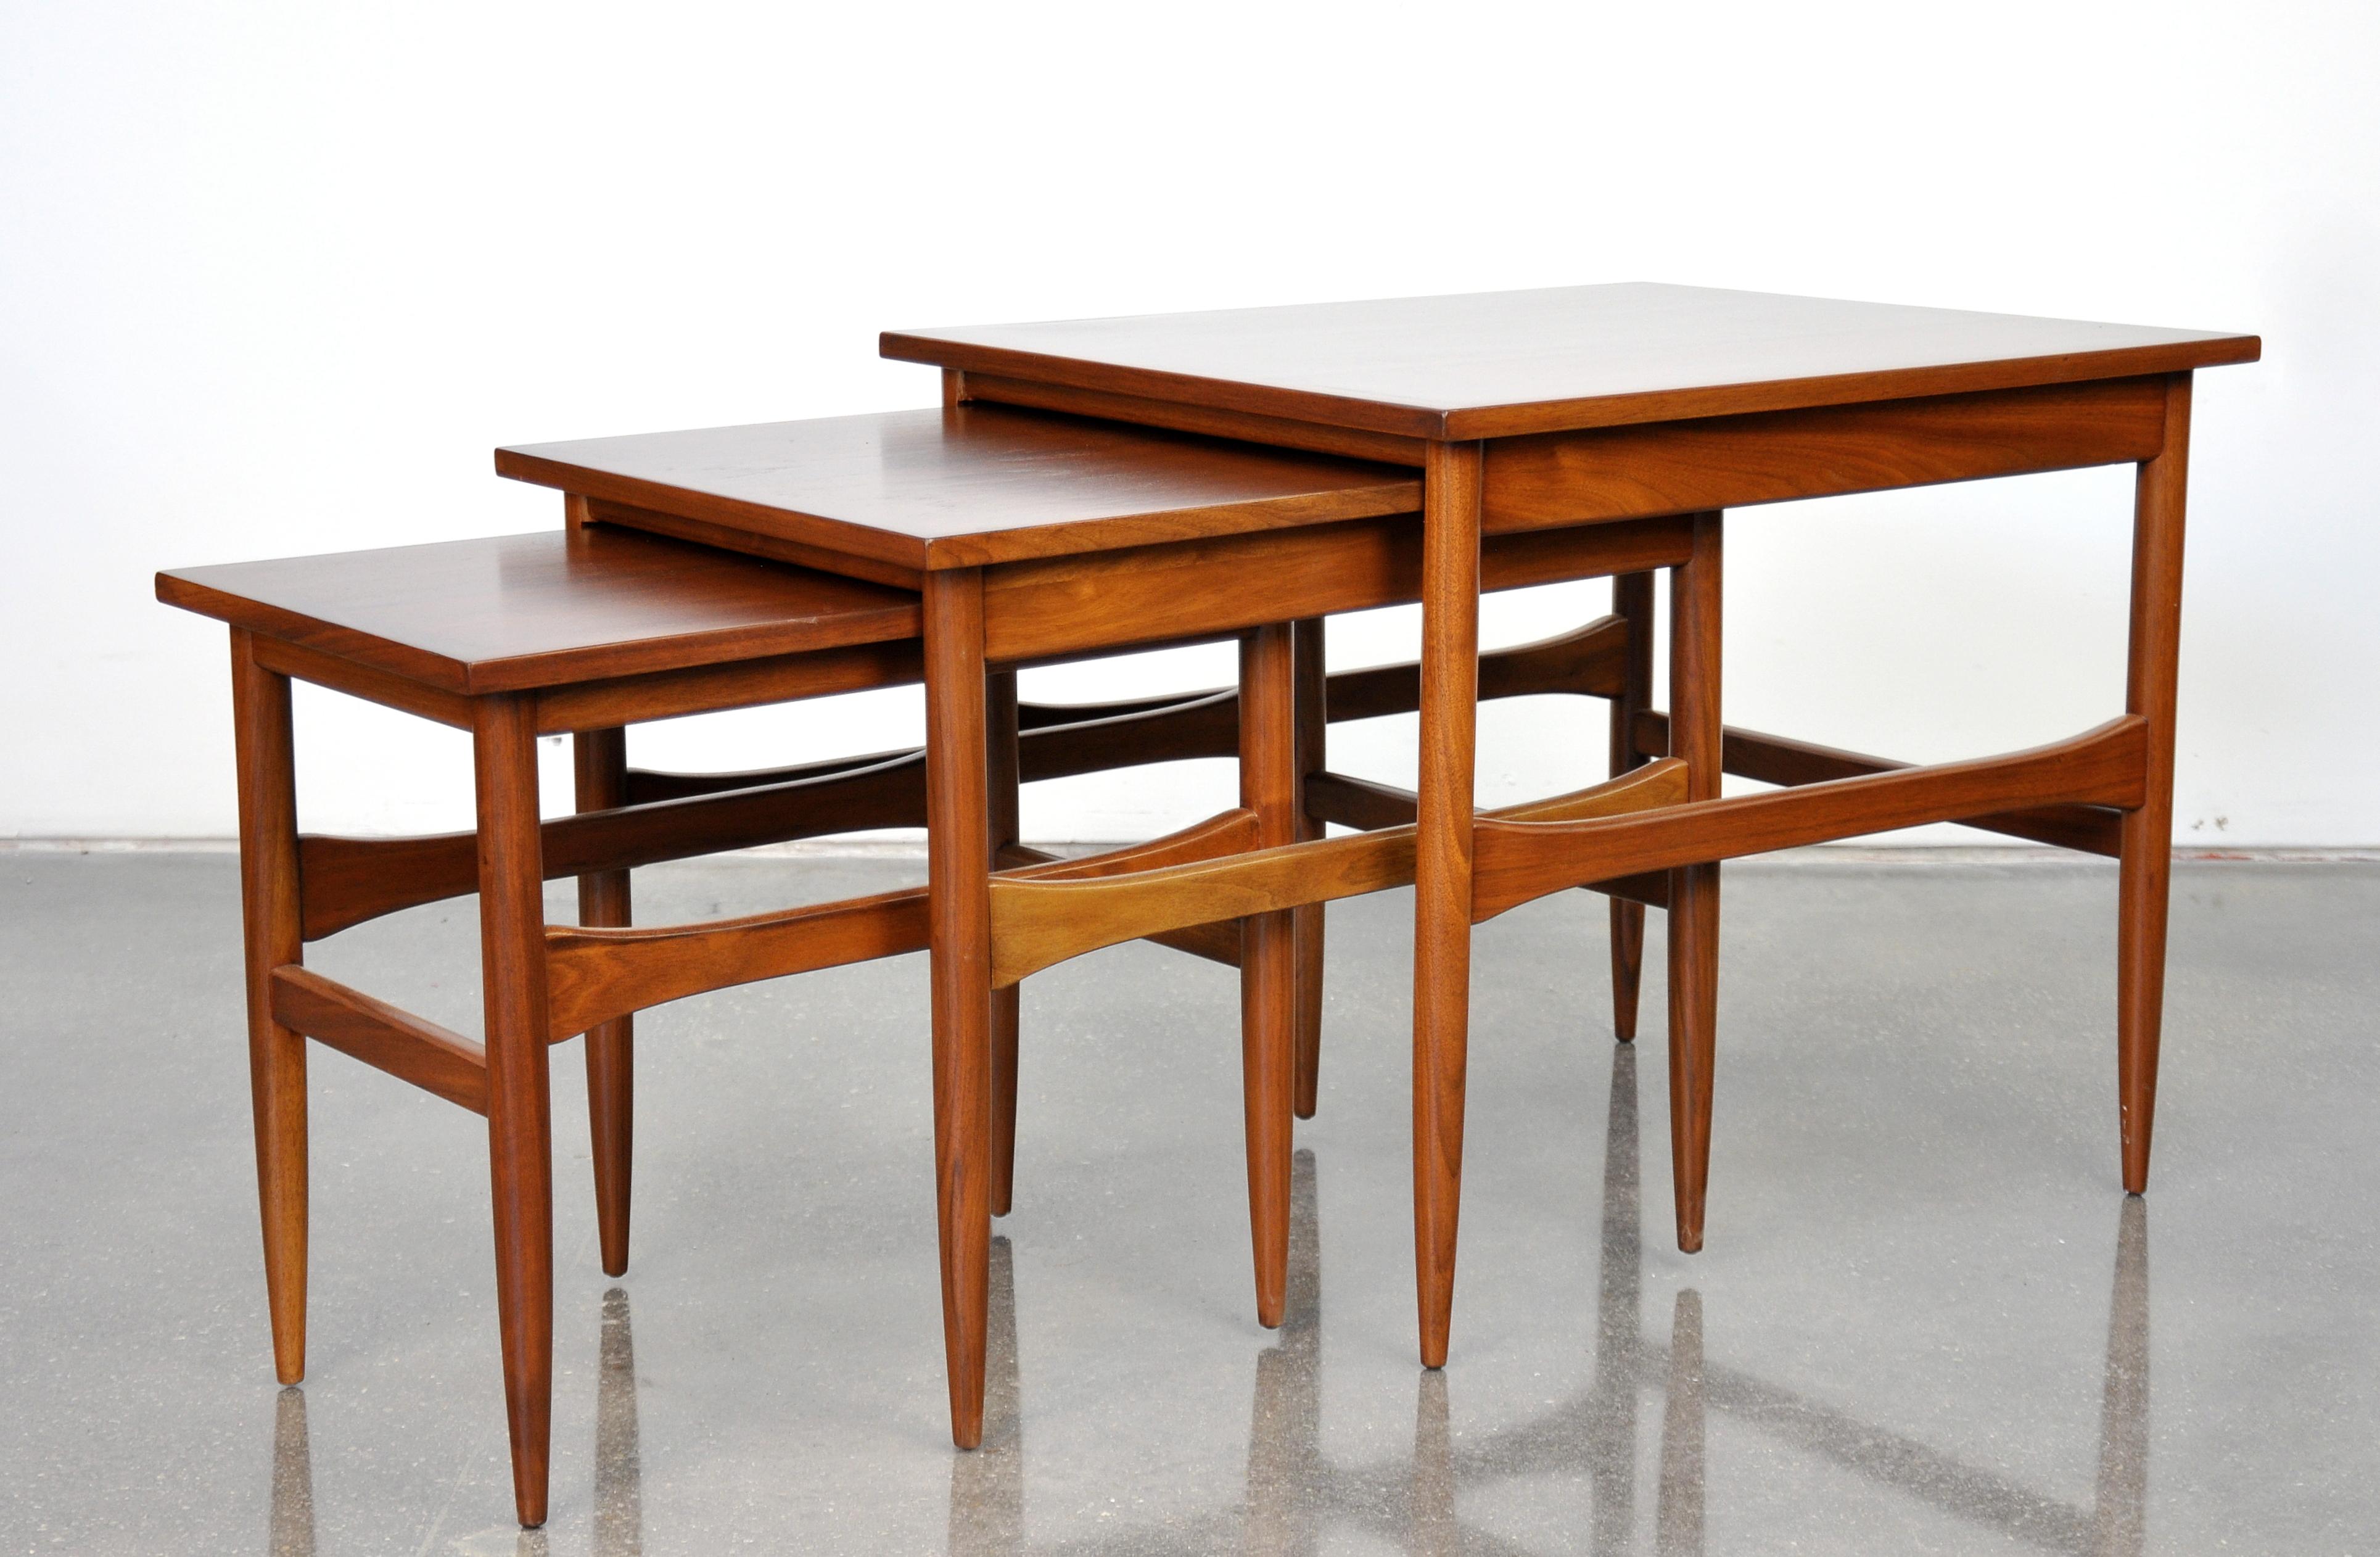 A vintage Danish modern set of three side tables dating from the 1960s. Each end table has a shaped spanner connecting the tapered legs. Medium occasional table measures 18.25 in x 14.5 in x 19 in H, smallest table measure 14.38 in x 14.13 in. x